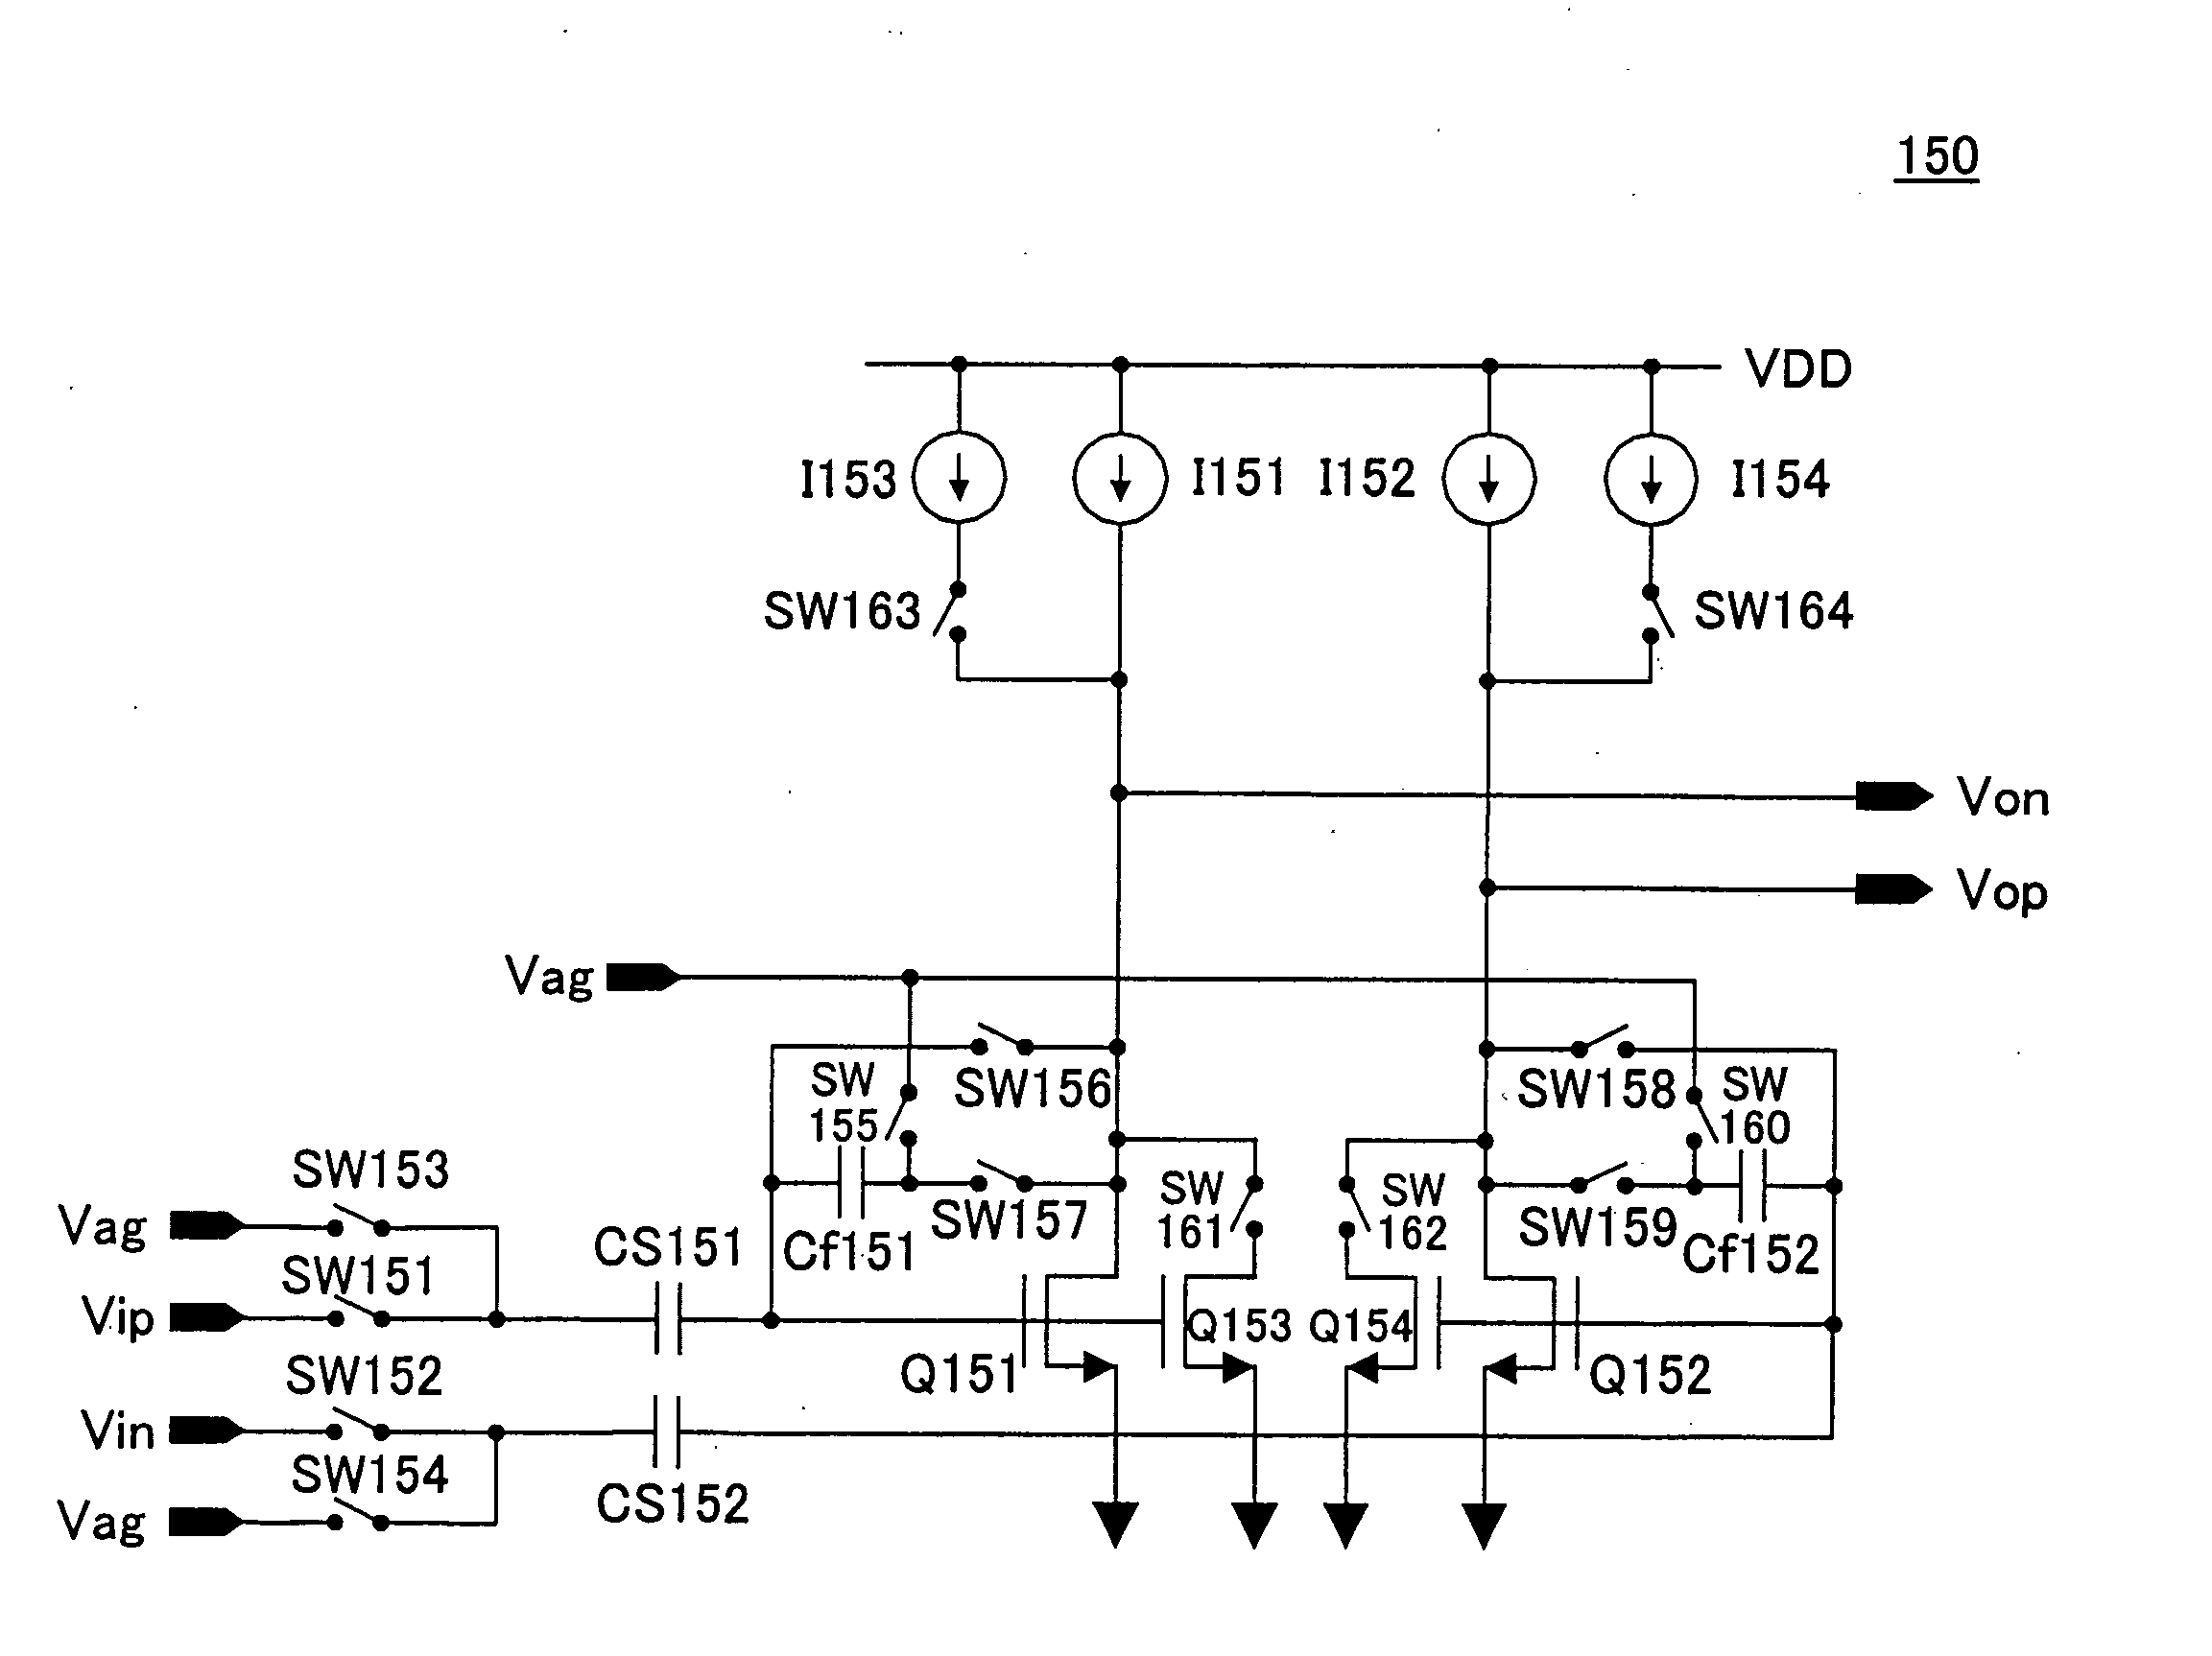 Sample-and-Hold Circuit and Pipeline Ad Converter Using Same